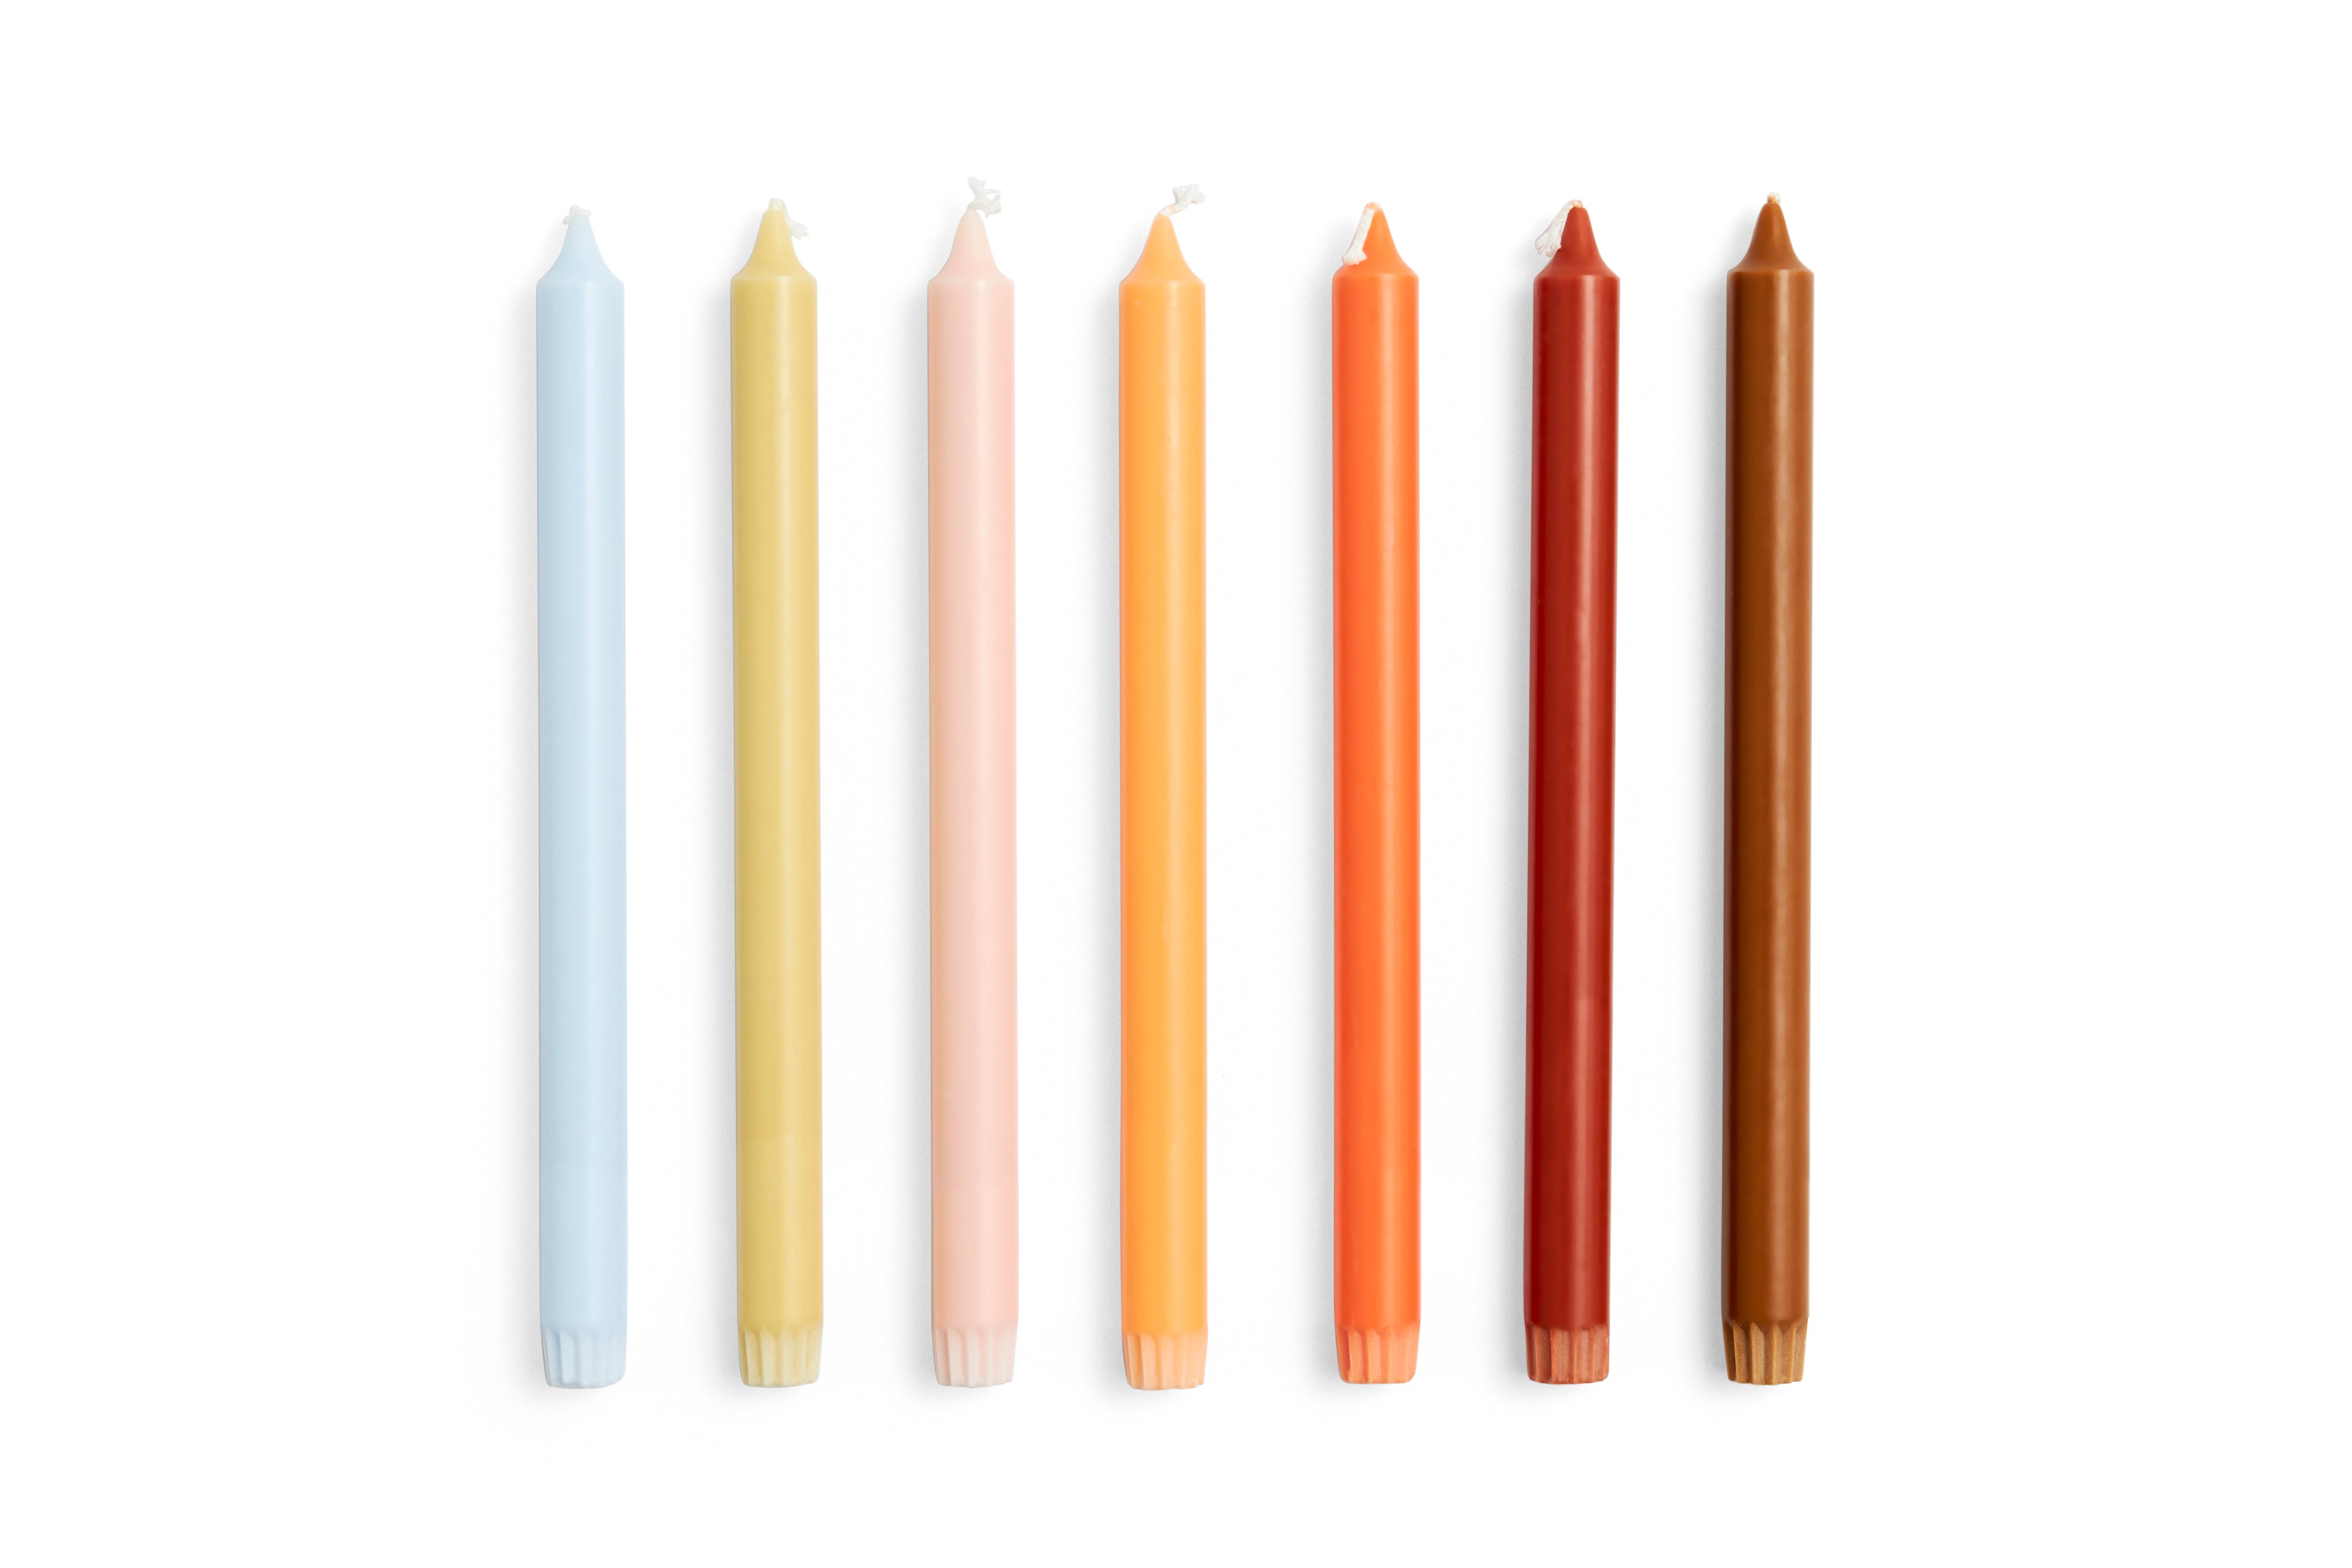 HAY Gradient Candle (Set of 7)